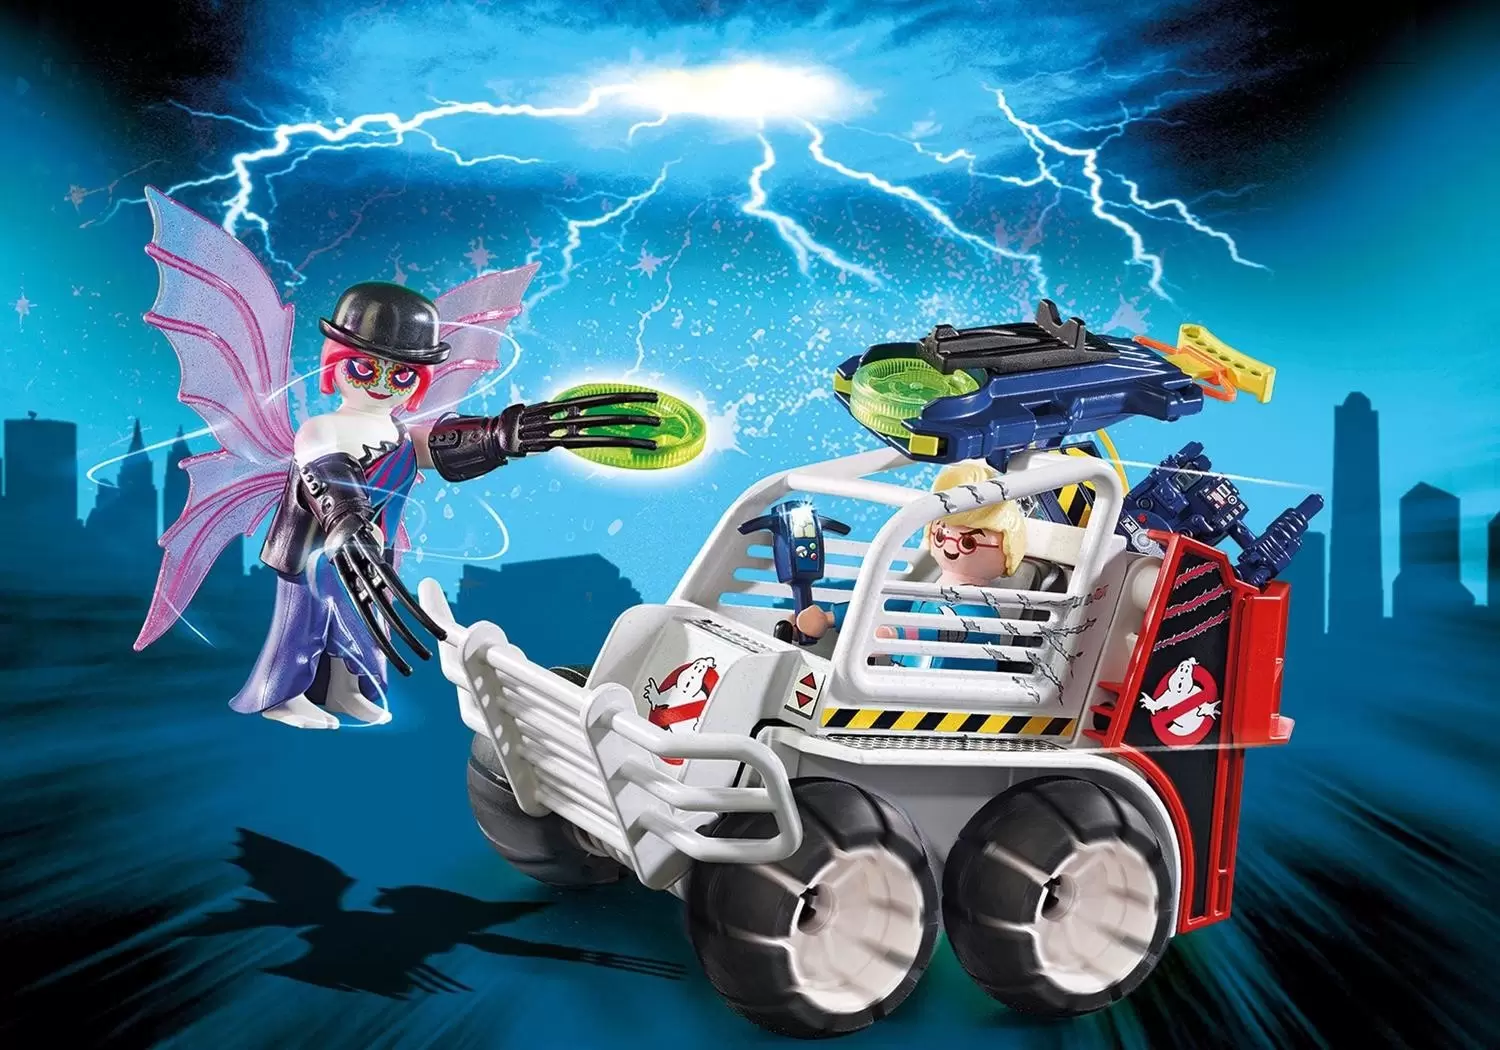 Playmobil Ghosbusters - Spengler with Cage Car